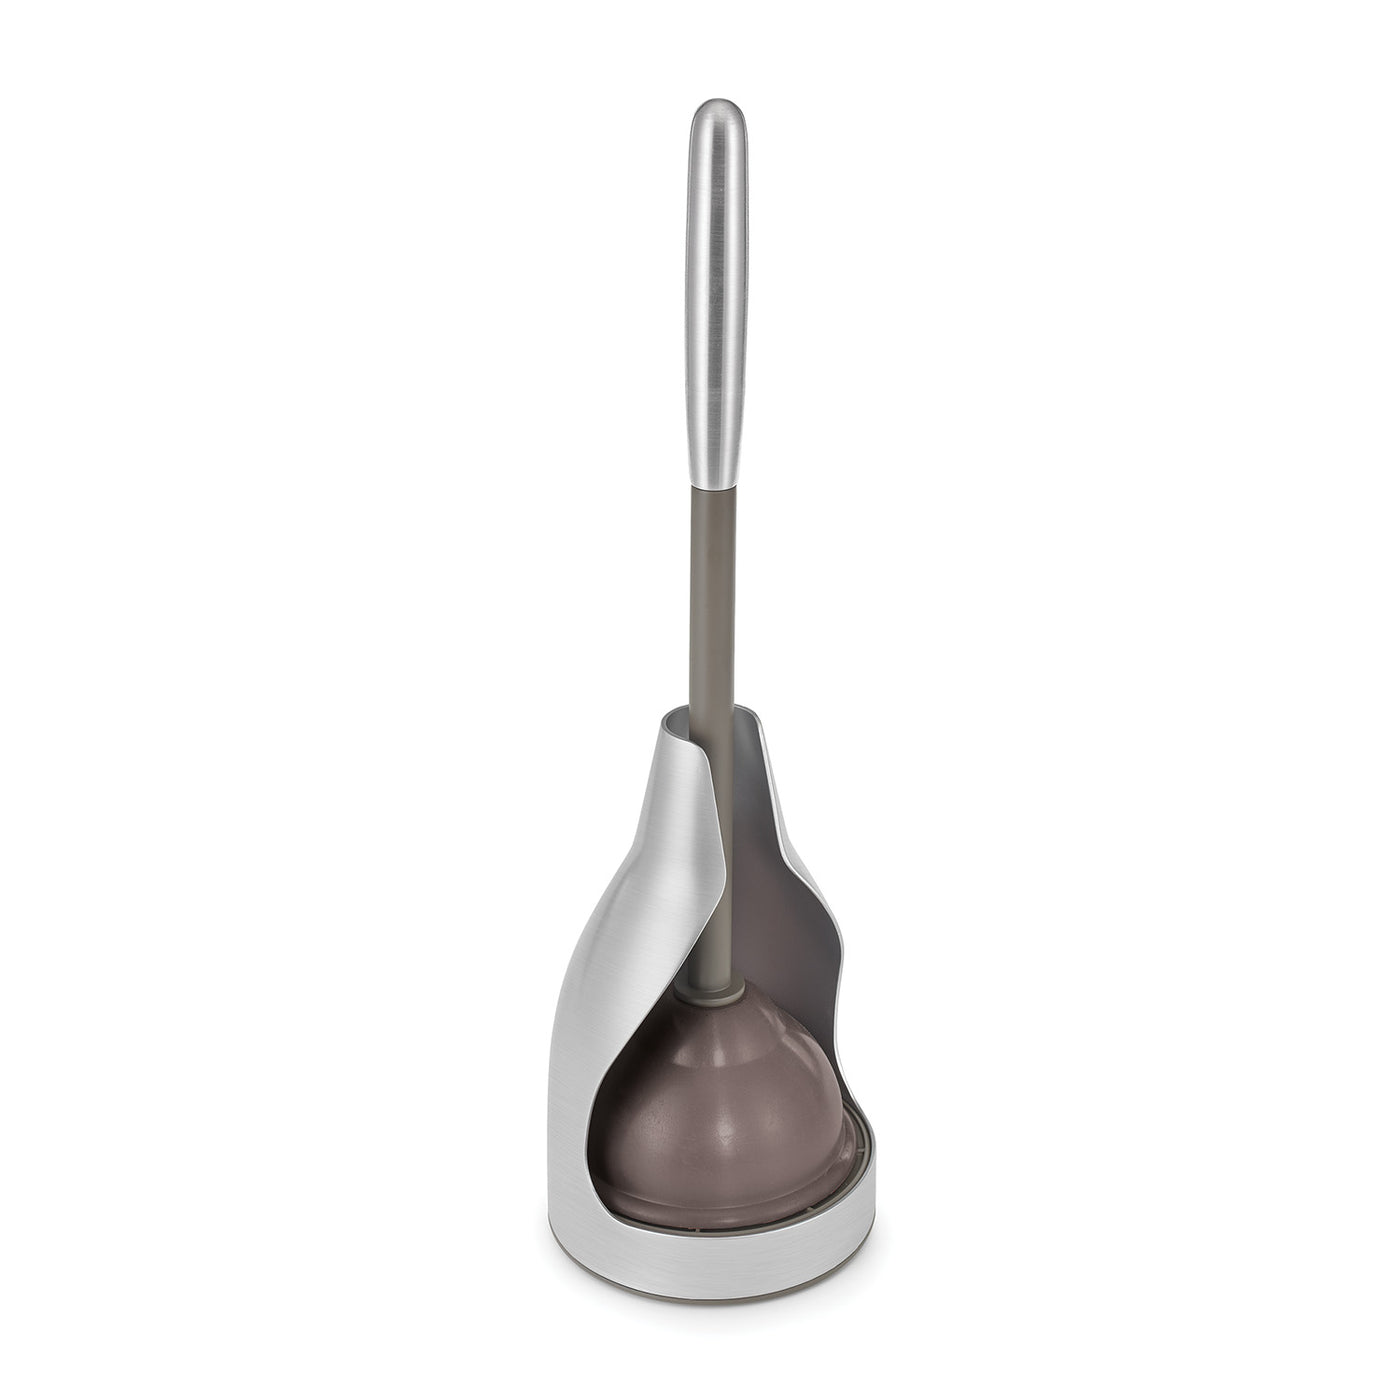 Stainless Steel Plunger Caddy